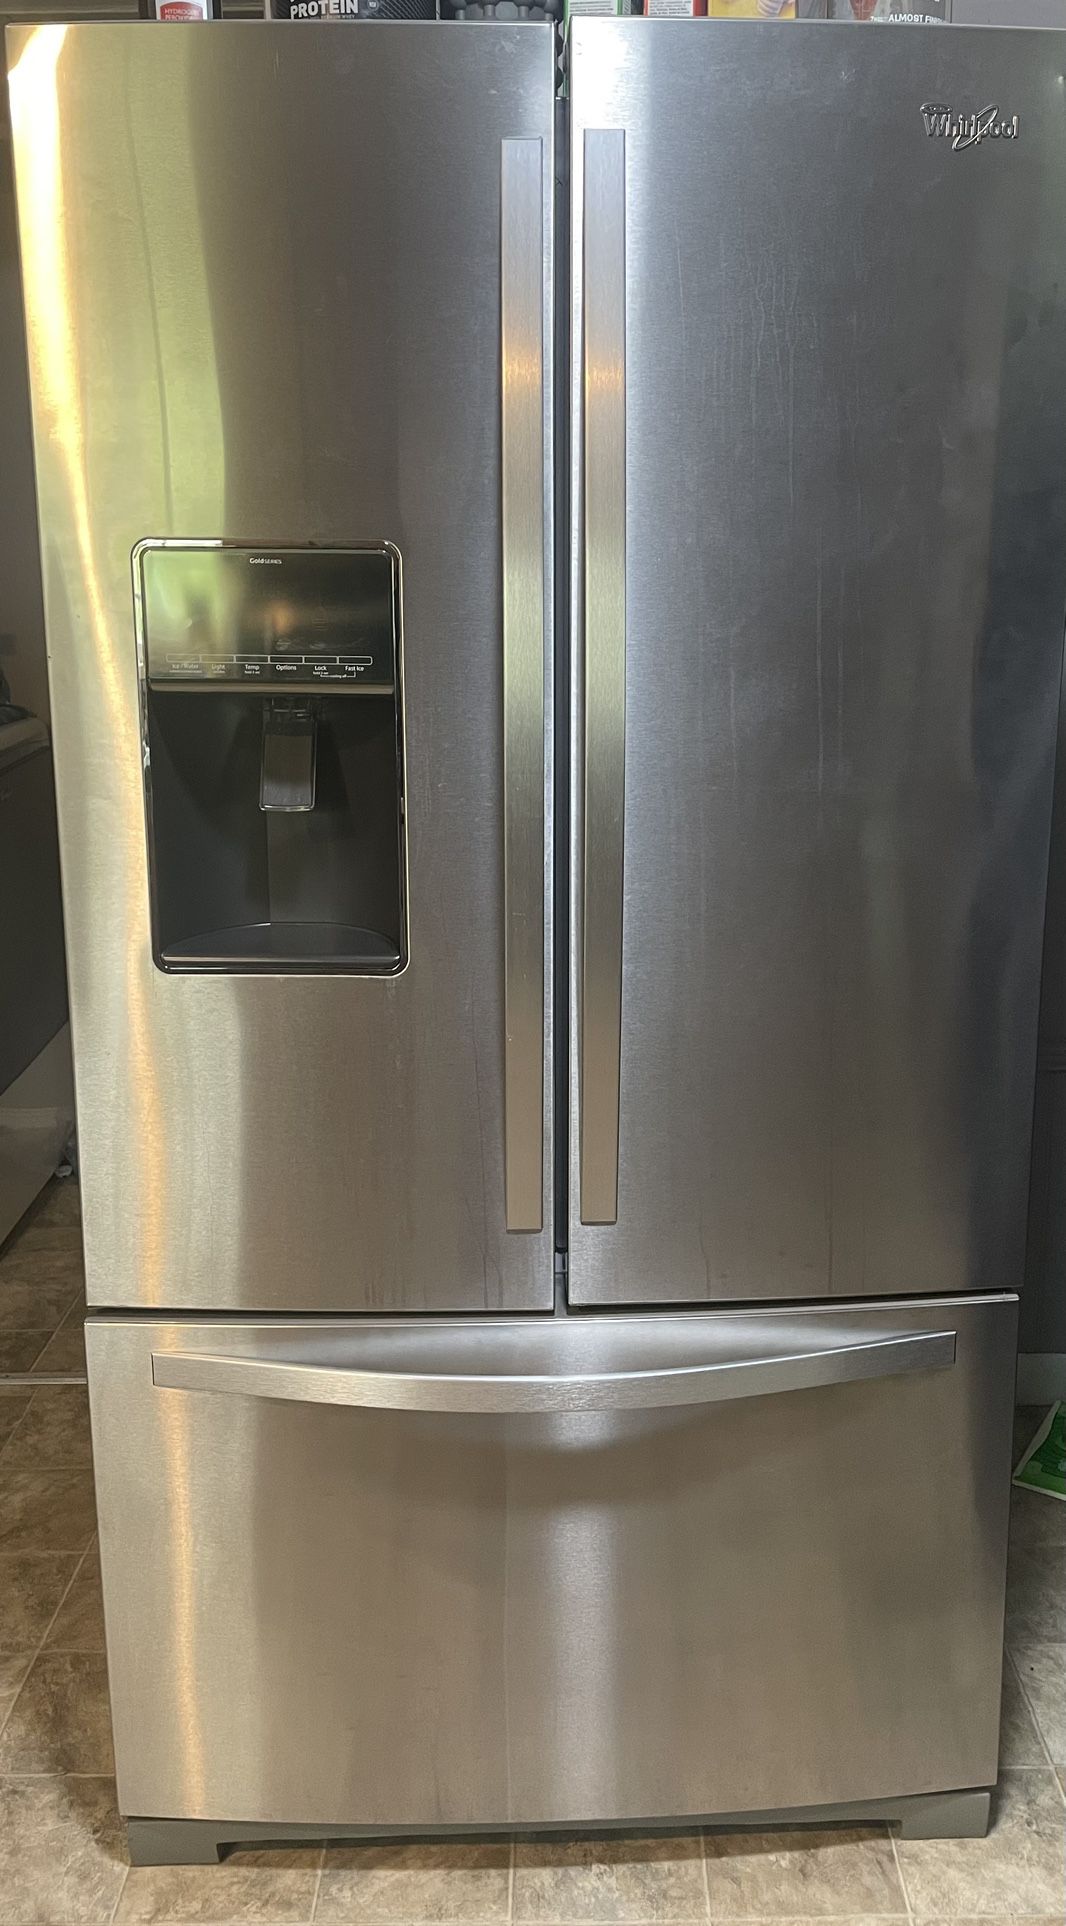 Whirlpool French Doors Stainless Steel refrigerator 